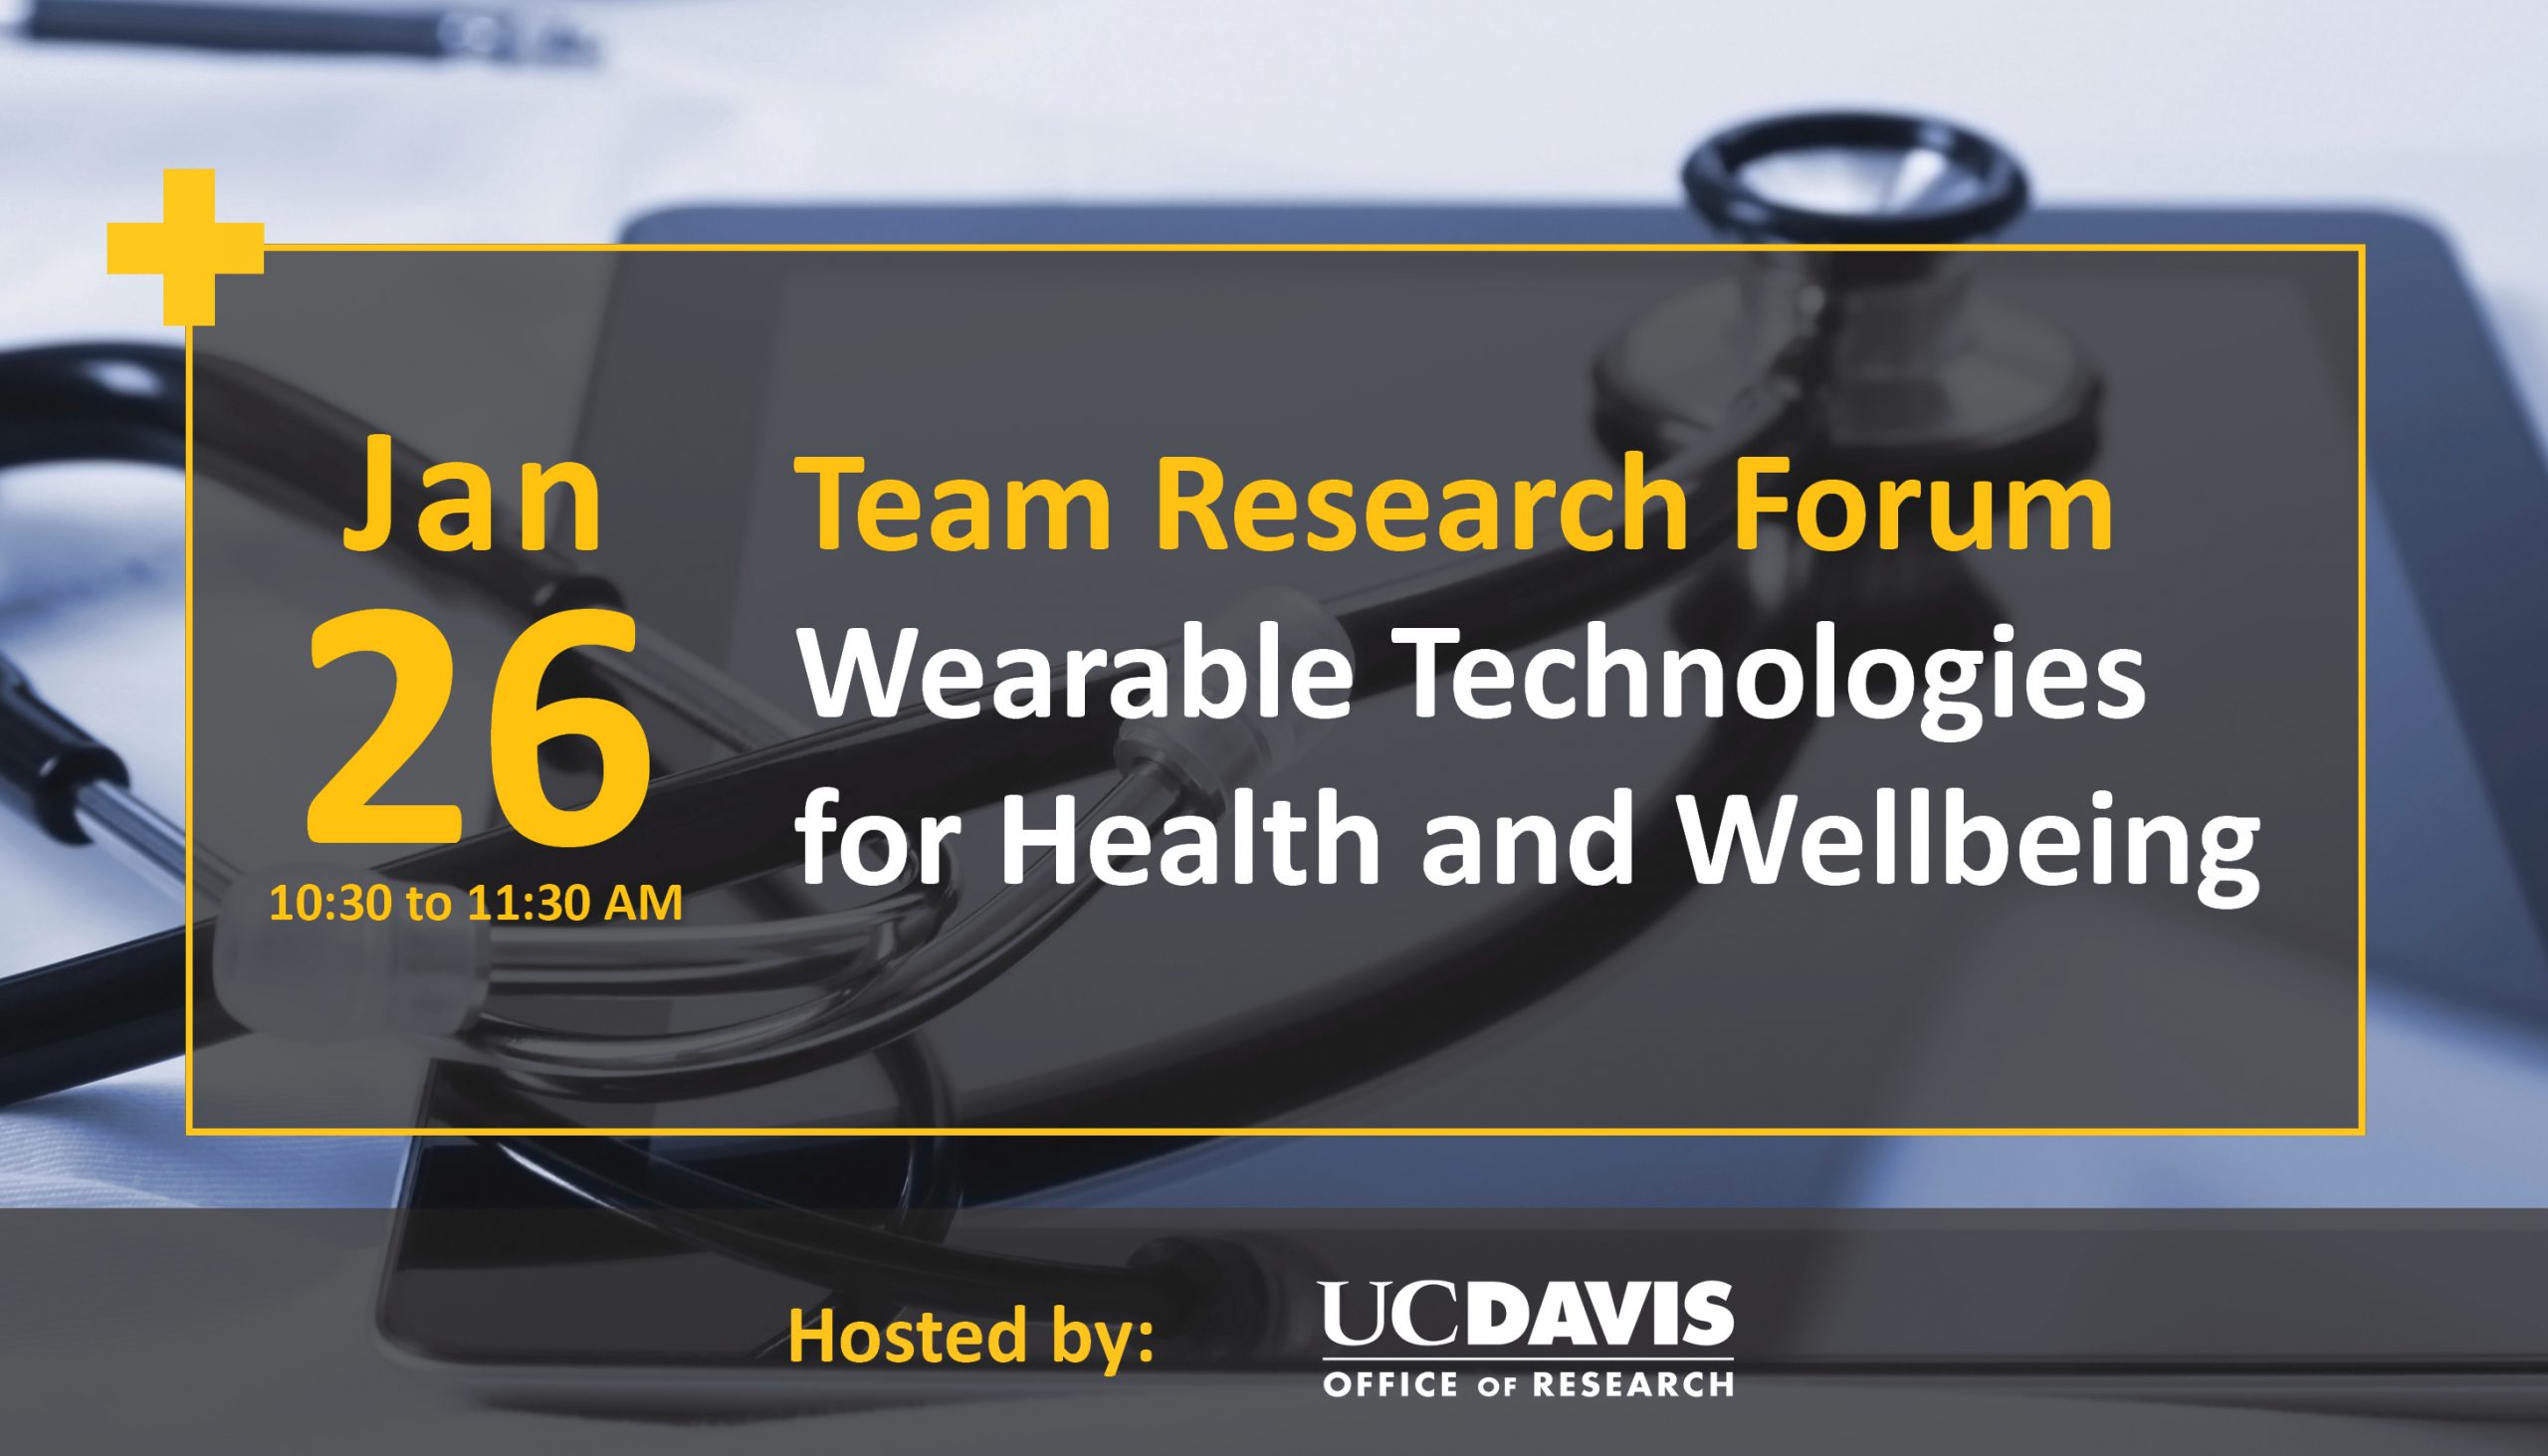 WATCH VIDEO</BR>Team Research Forum: Wearable Technologies for Health and Wellbeing